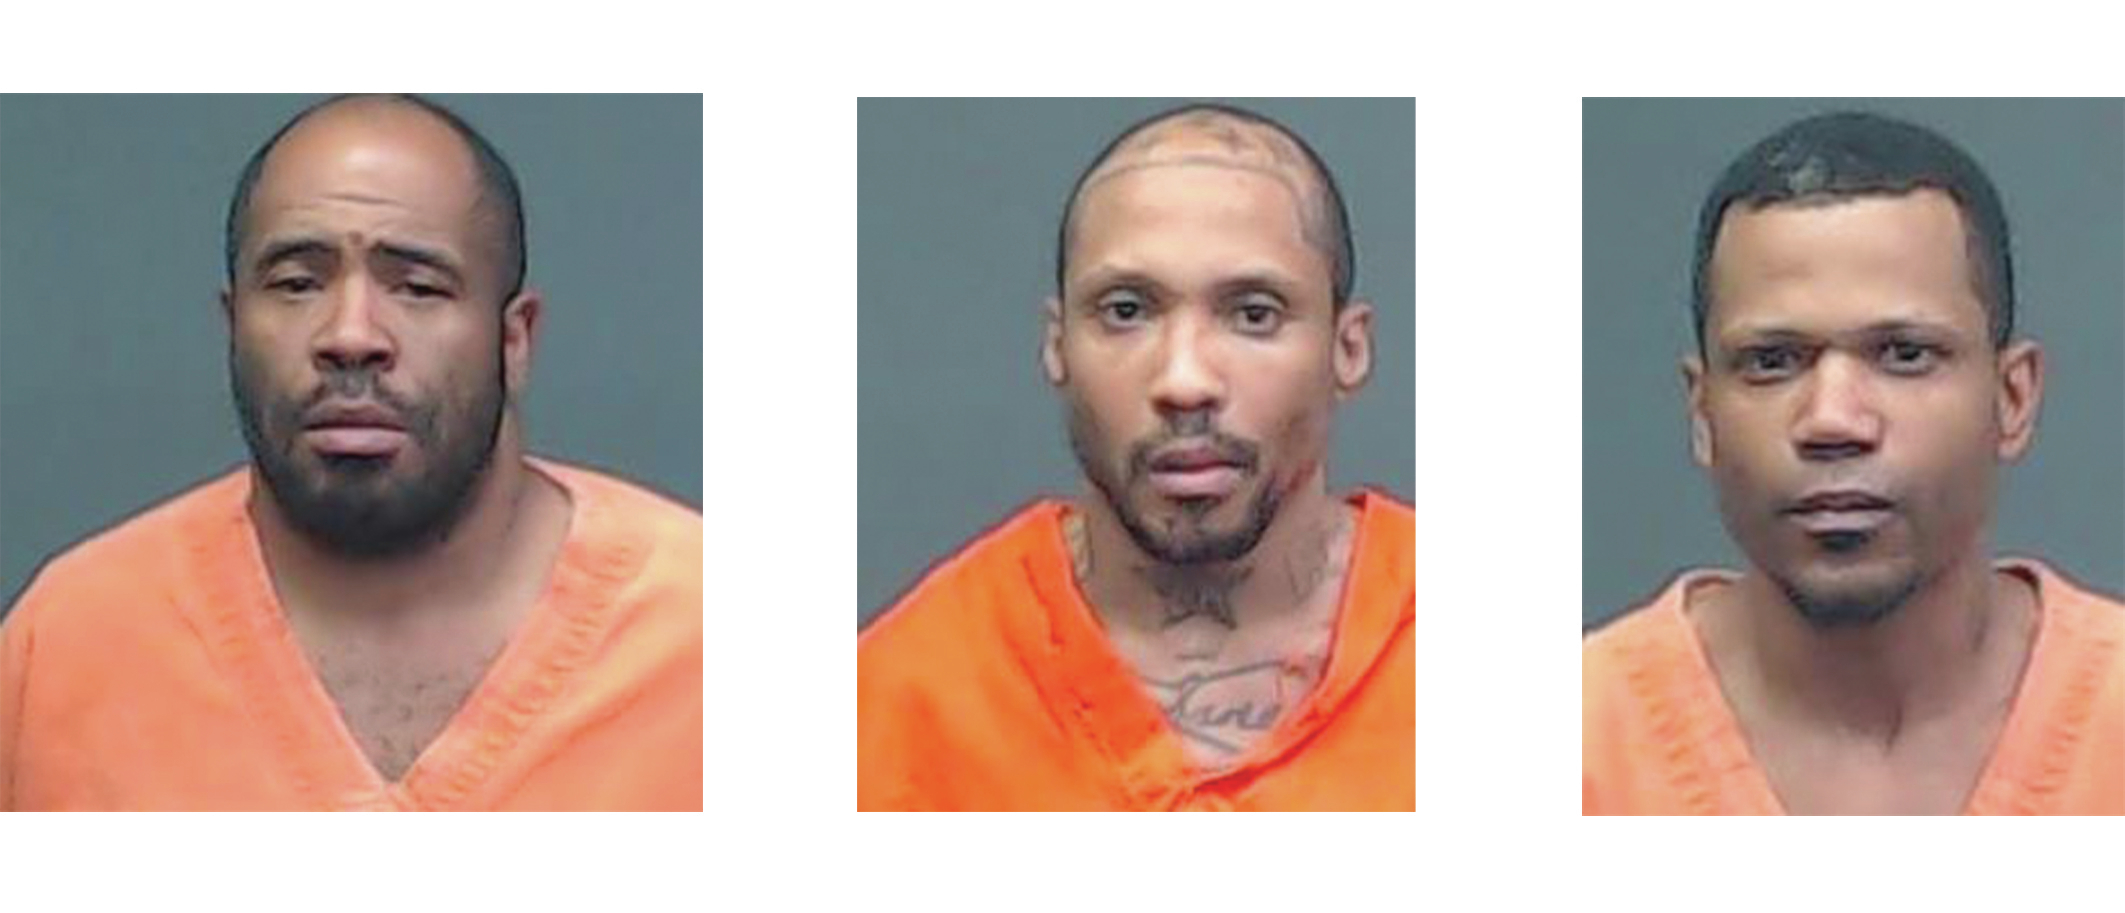 Three men charged with human trafficking involving multiple women in Texarkana picture